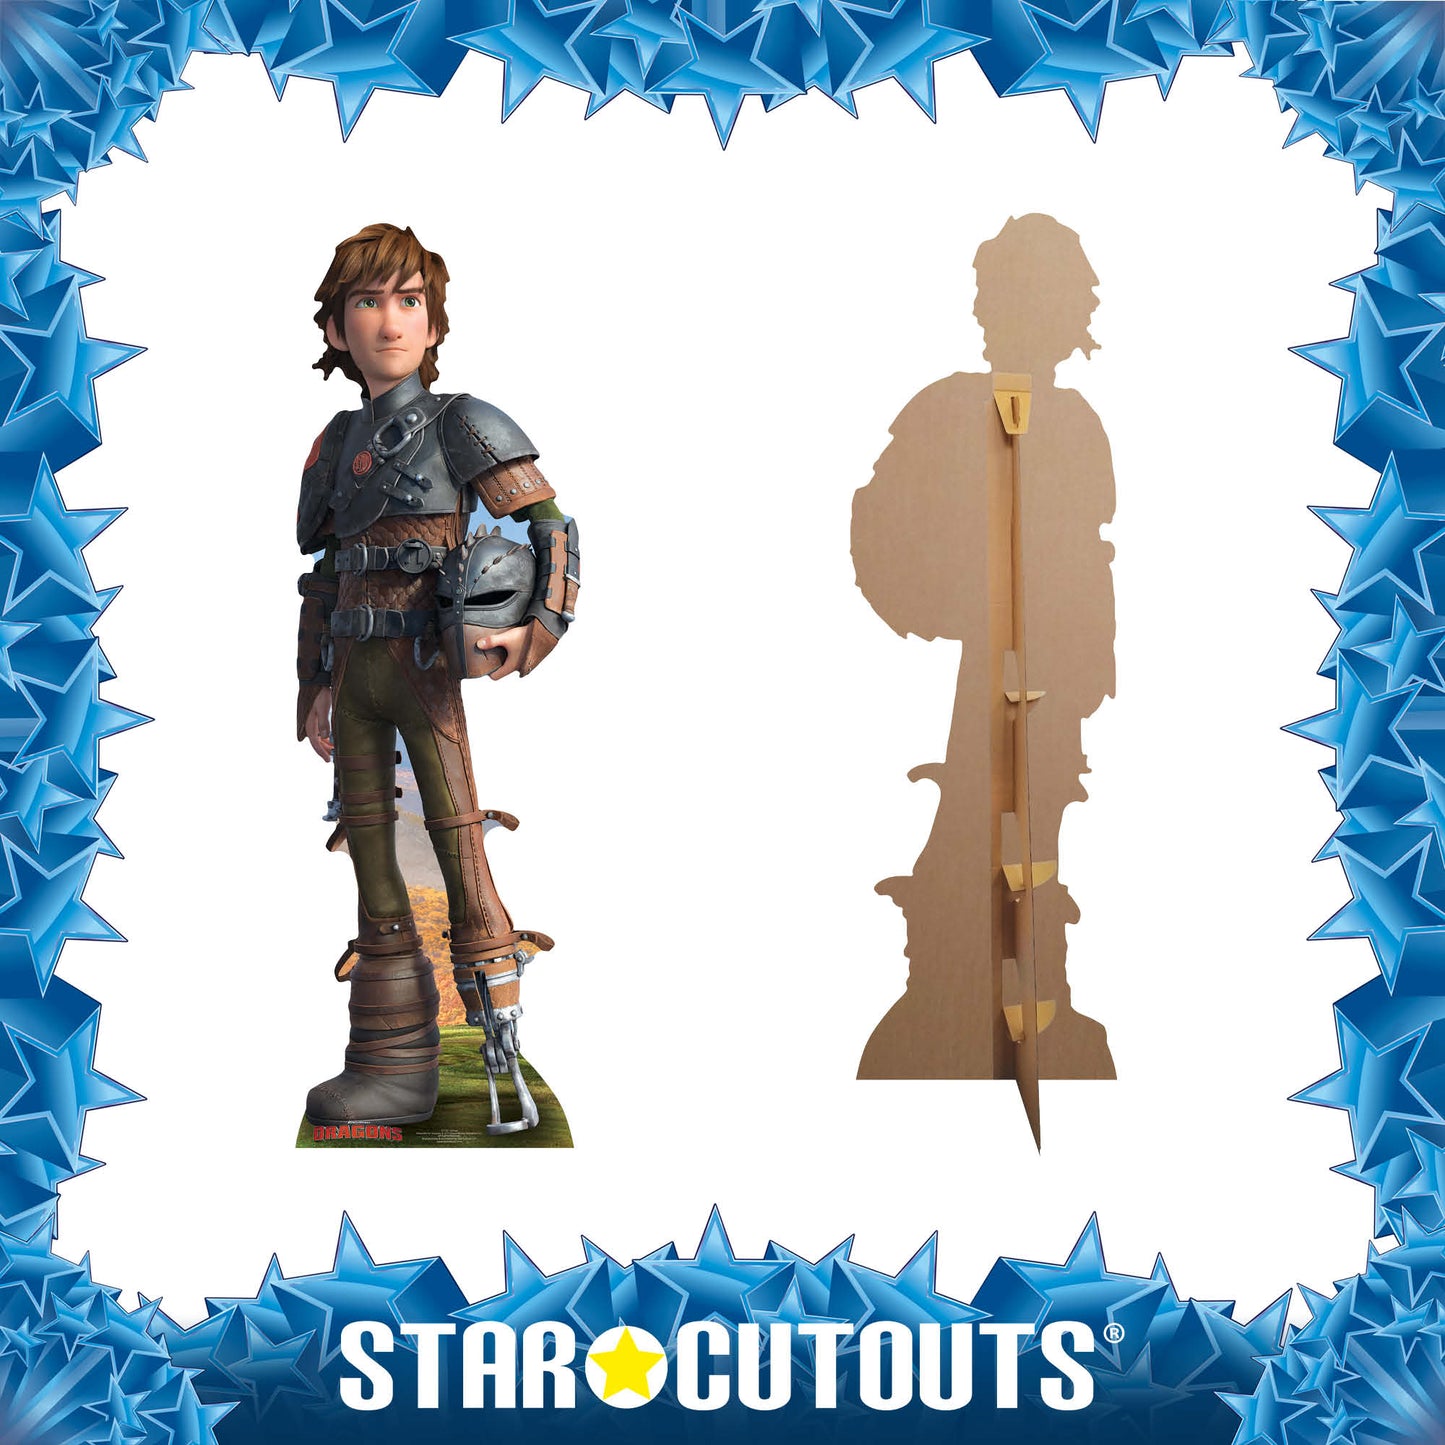 Hiccup Cardboard Cutout